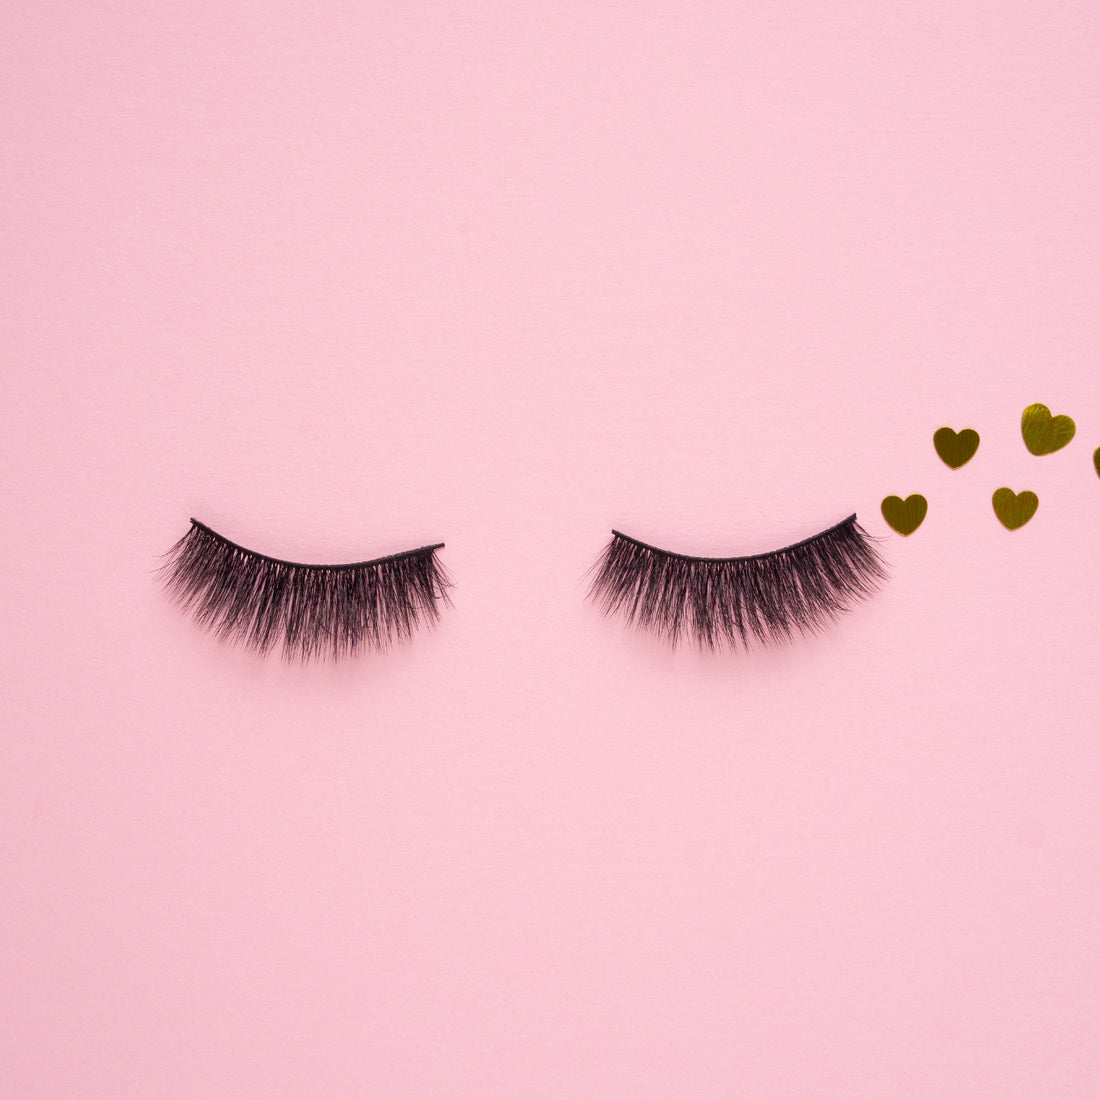 The Top 5 Mistakes to Avoid for Lash Artists